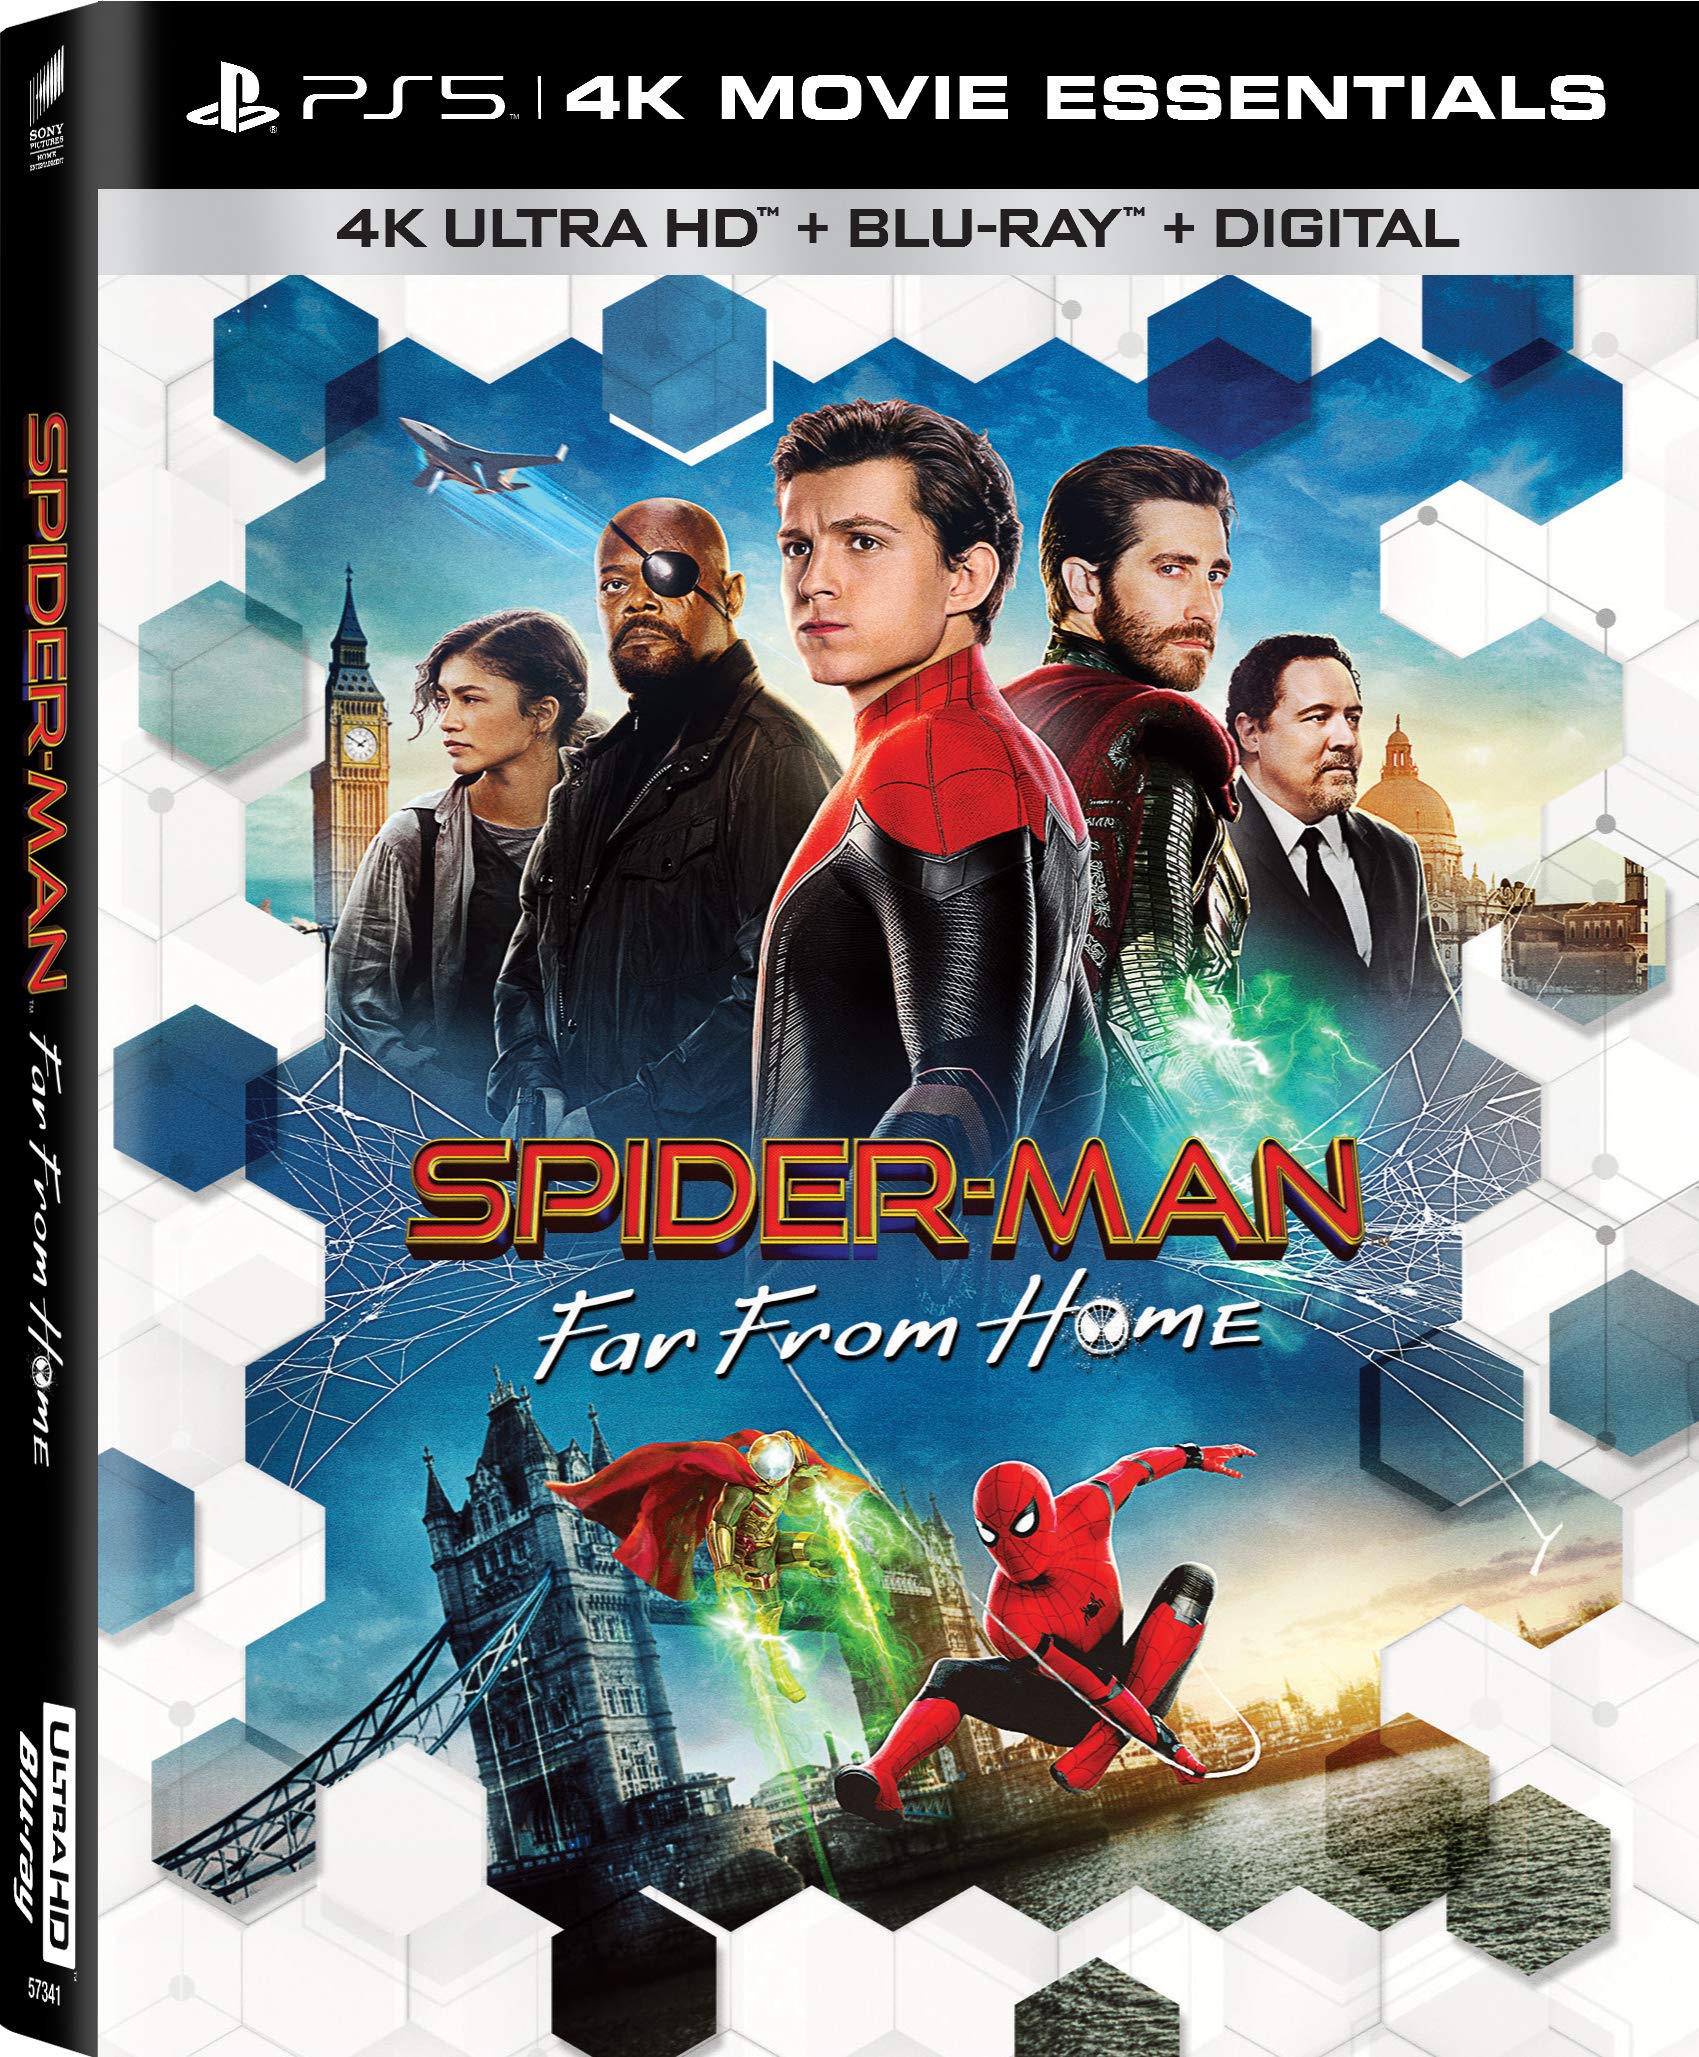 SpiderMan Far From Home DVD Release Date October 1, 2019